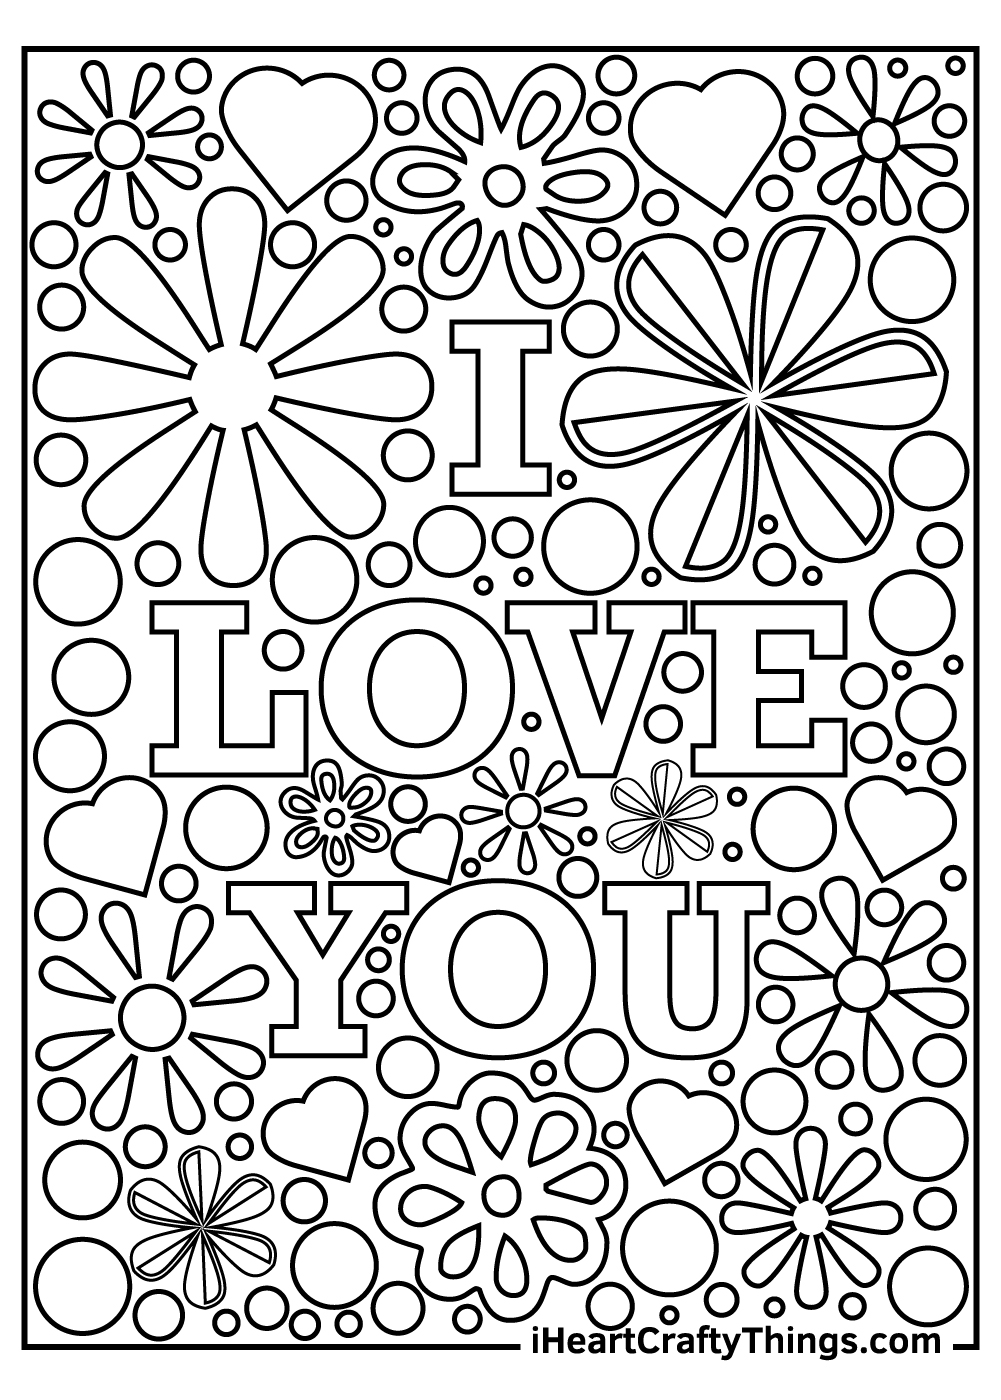 I love you coloring pages free printables